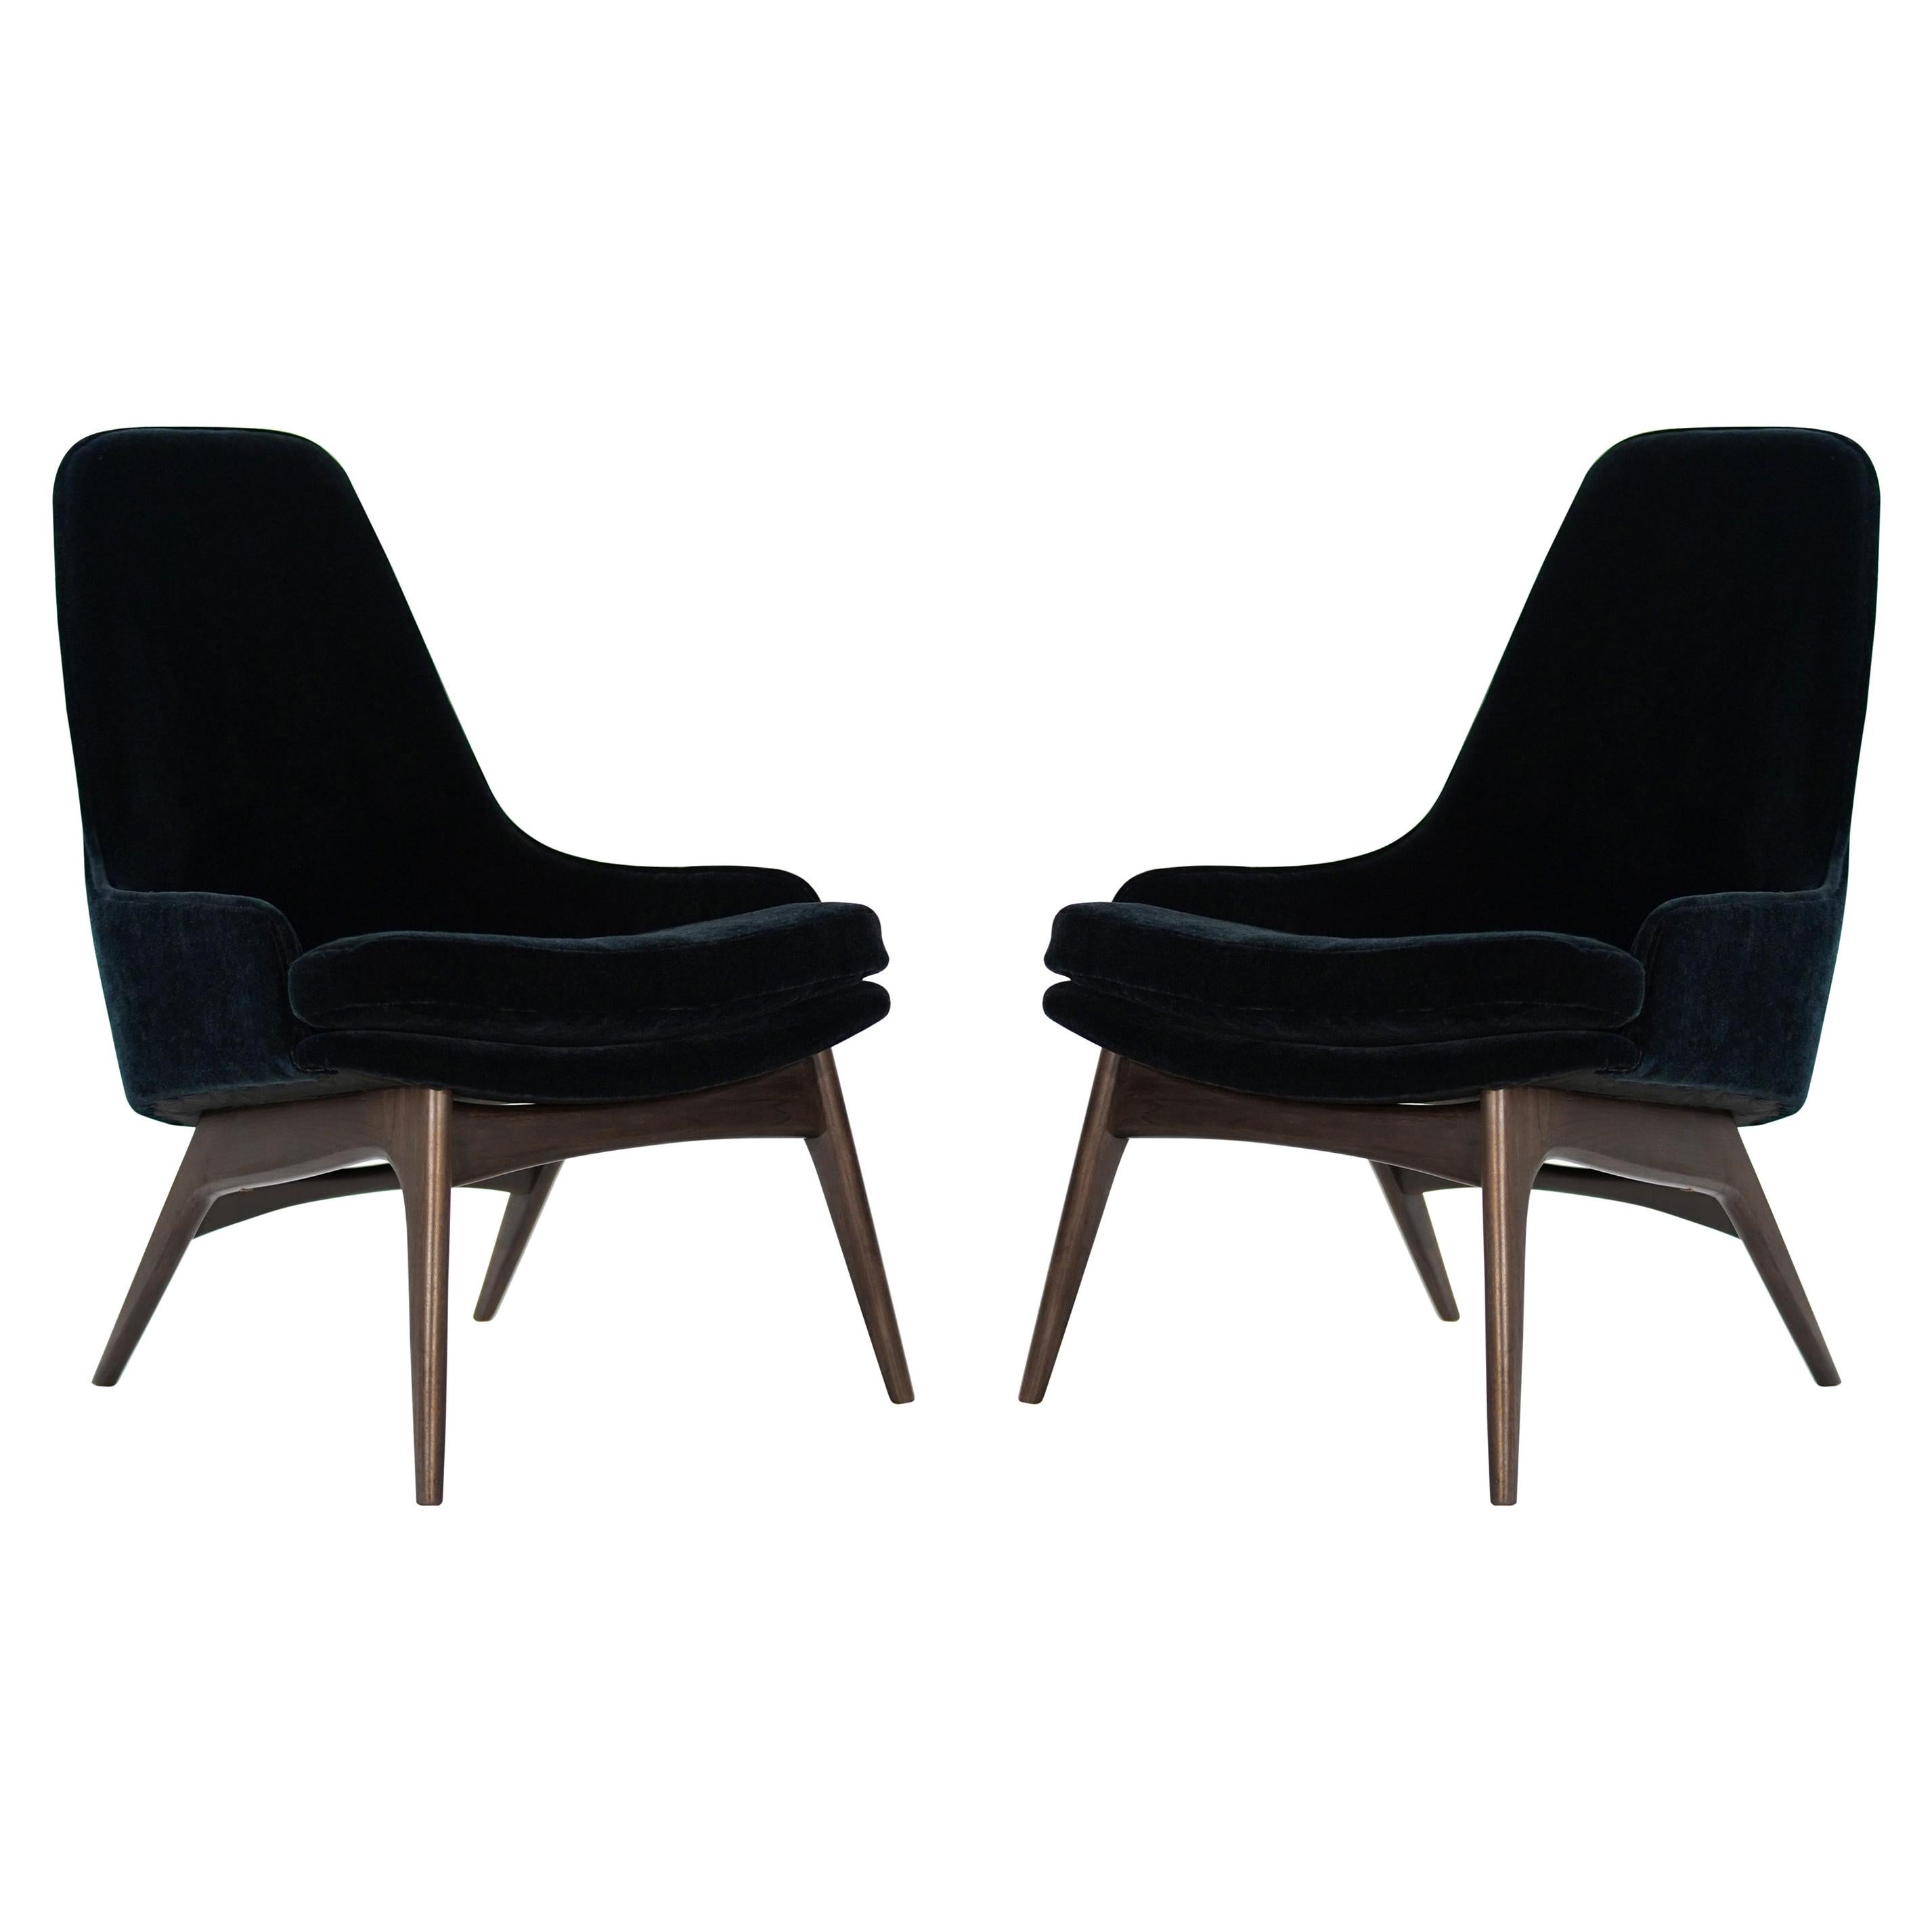 Set of Slipper Chairs by Adrian Pearsall in Navy Mohair, 1950s For Sale